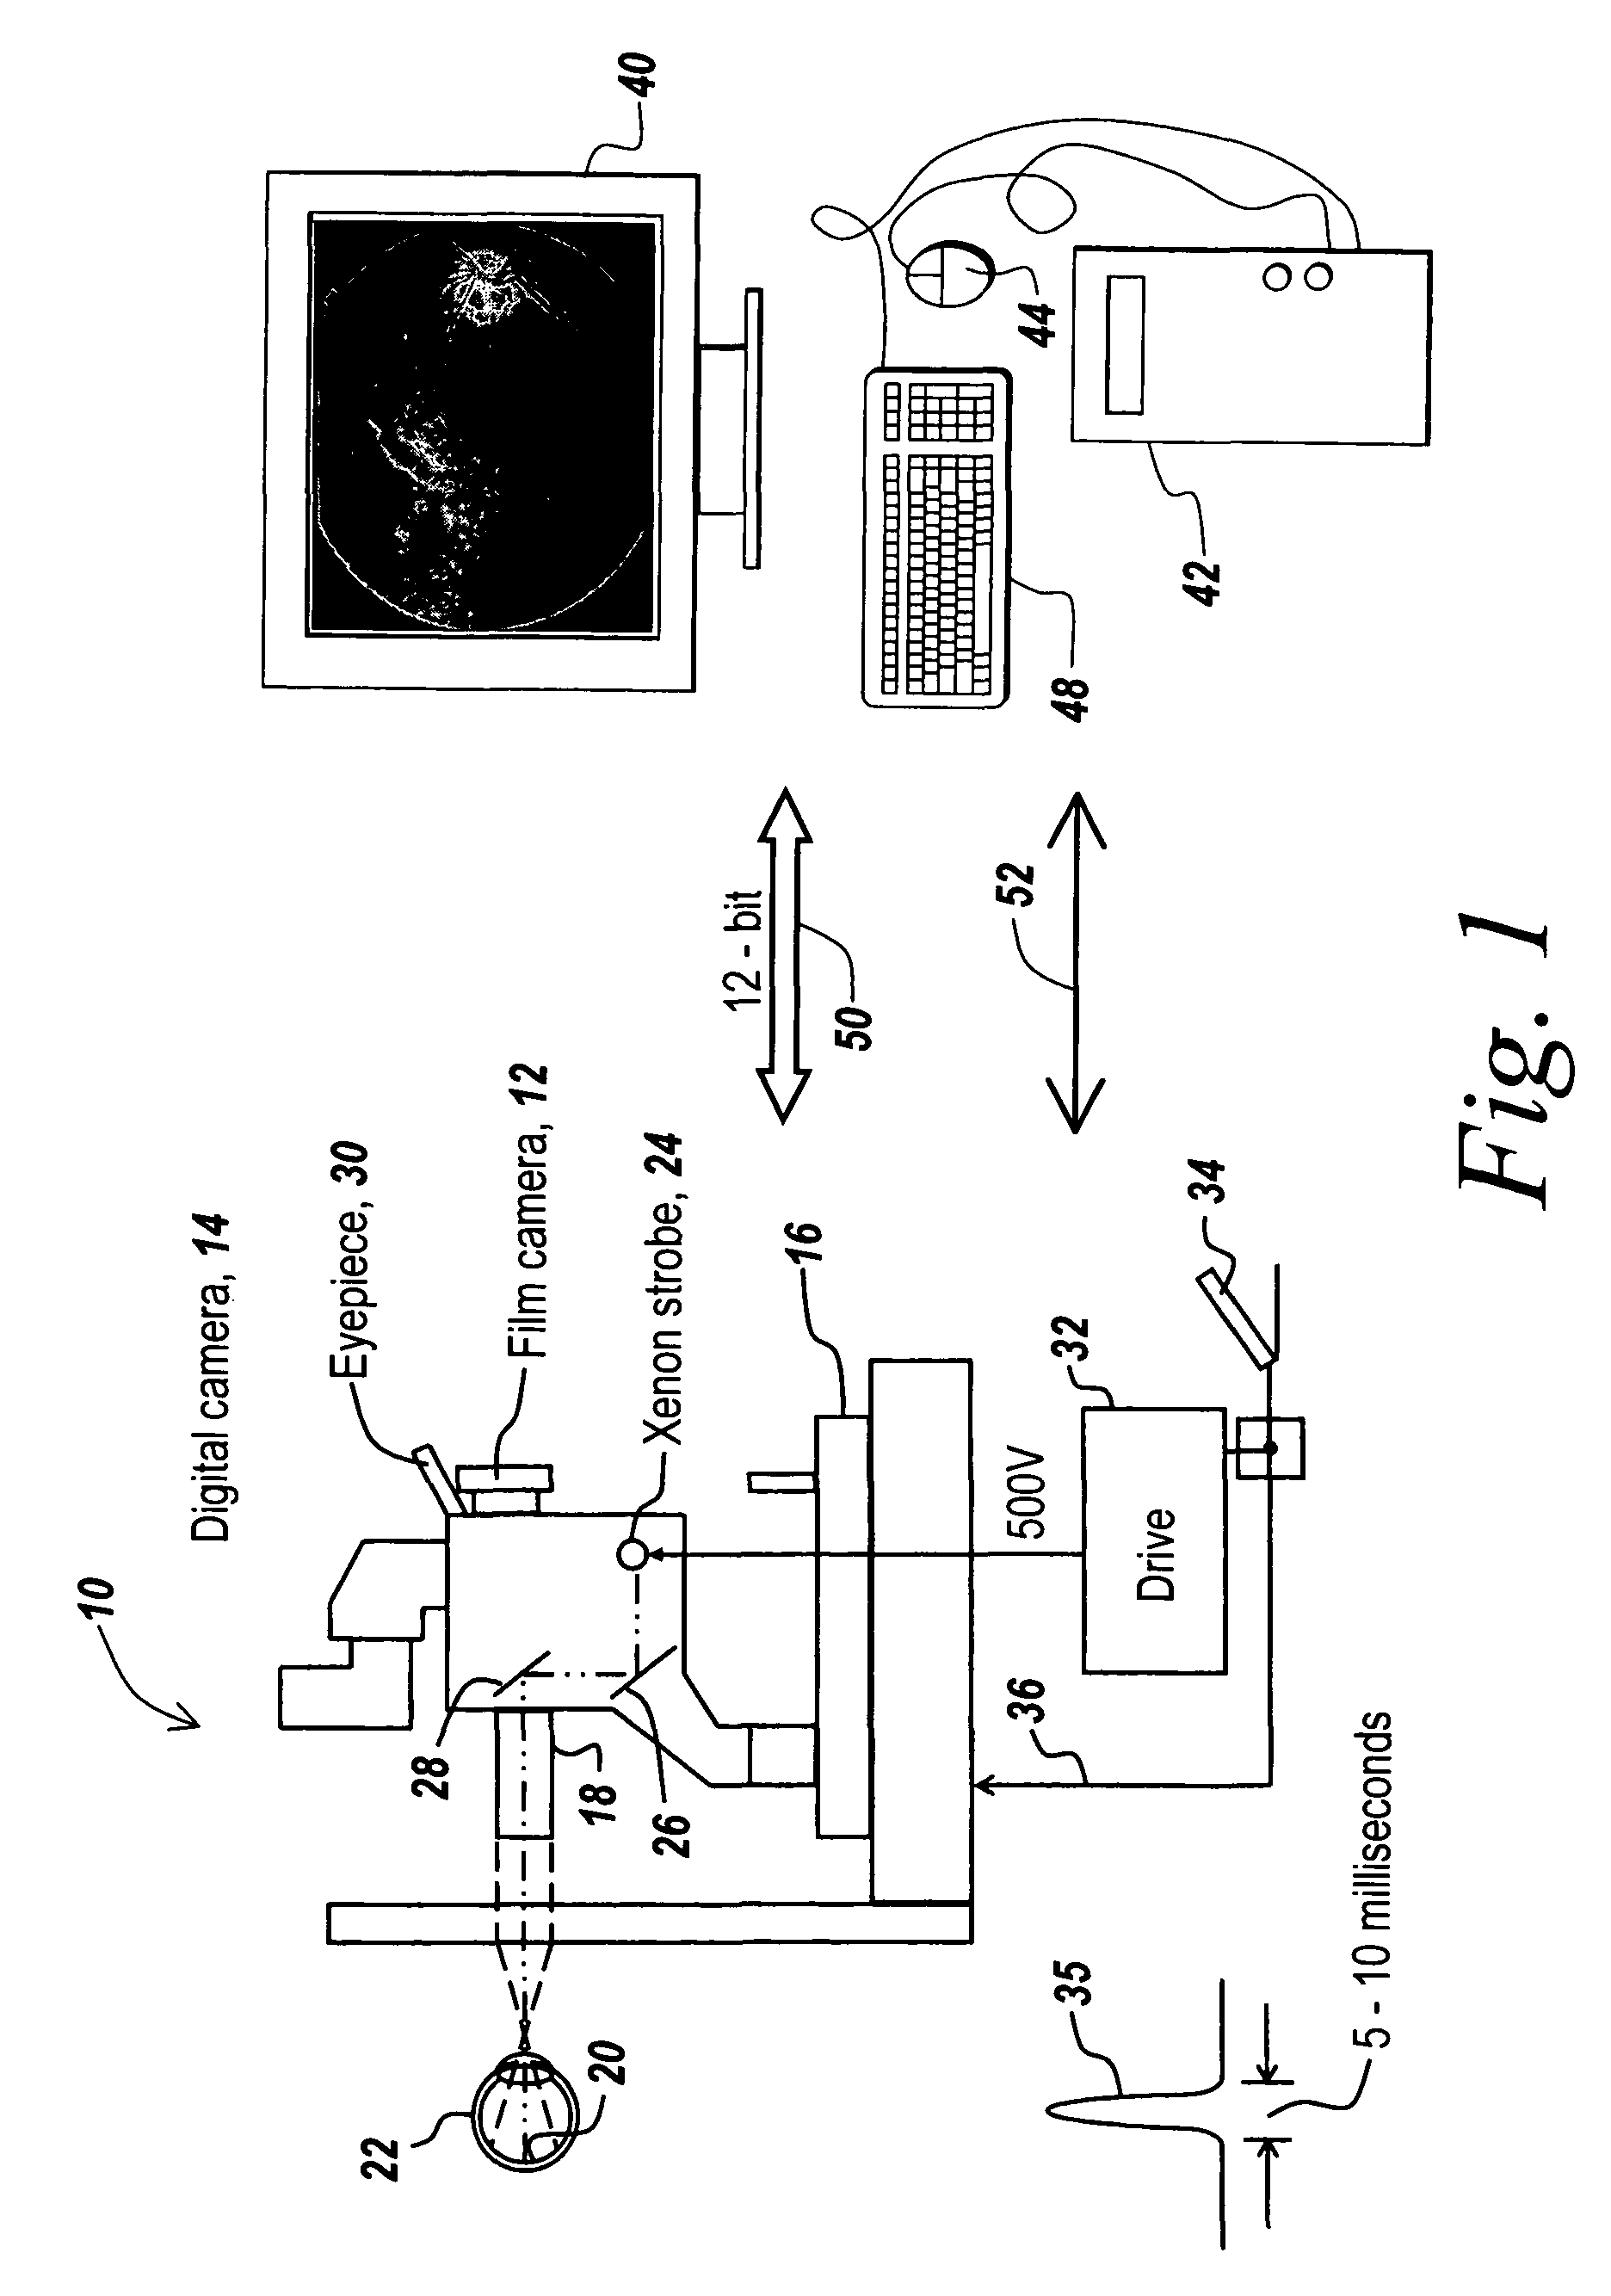 Haze reduction method and apparatus for use in retinal imaging